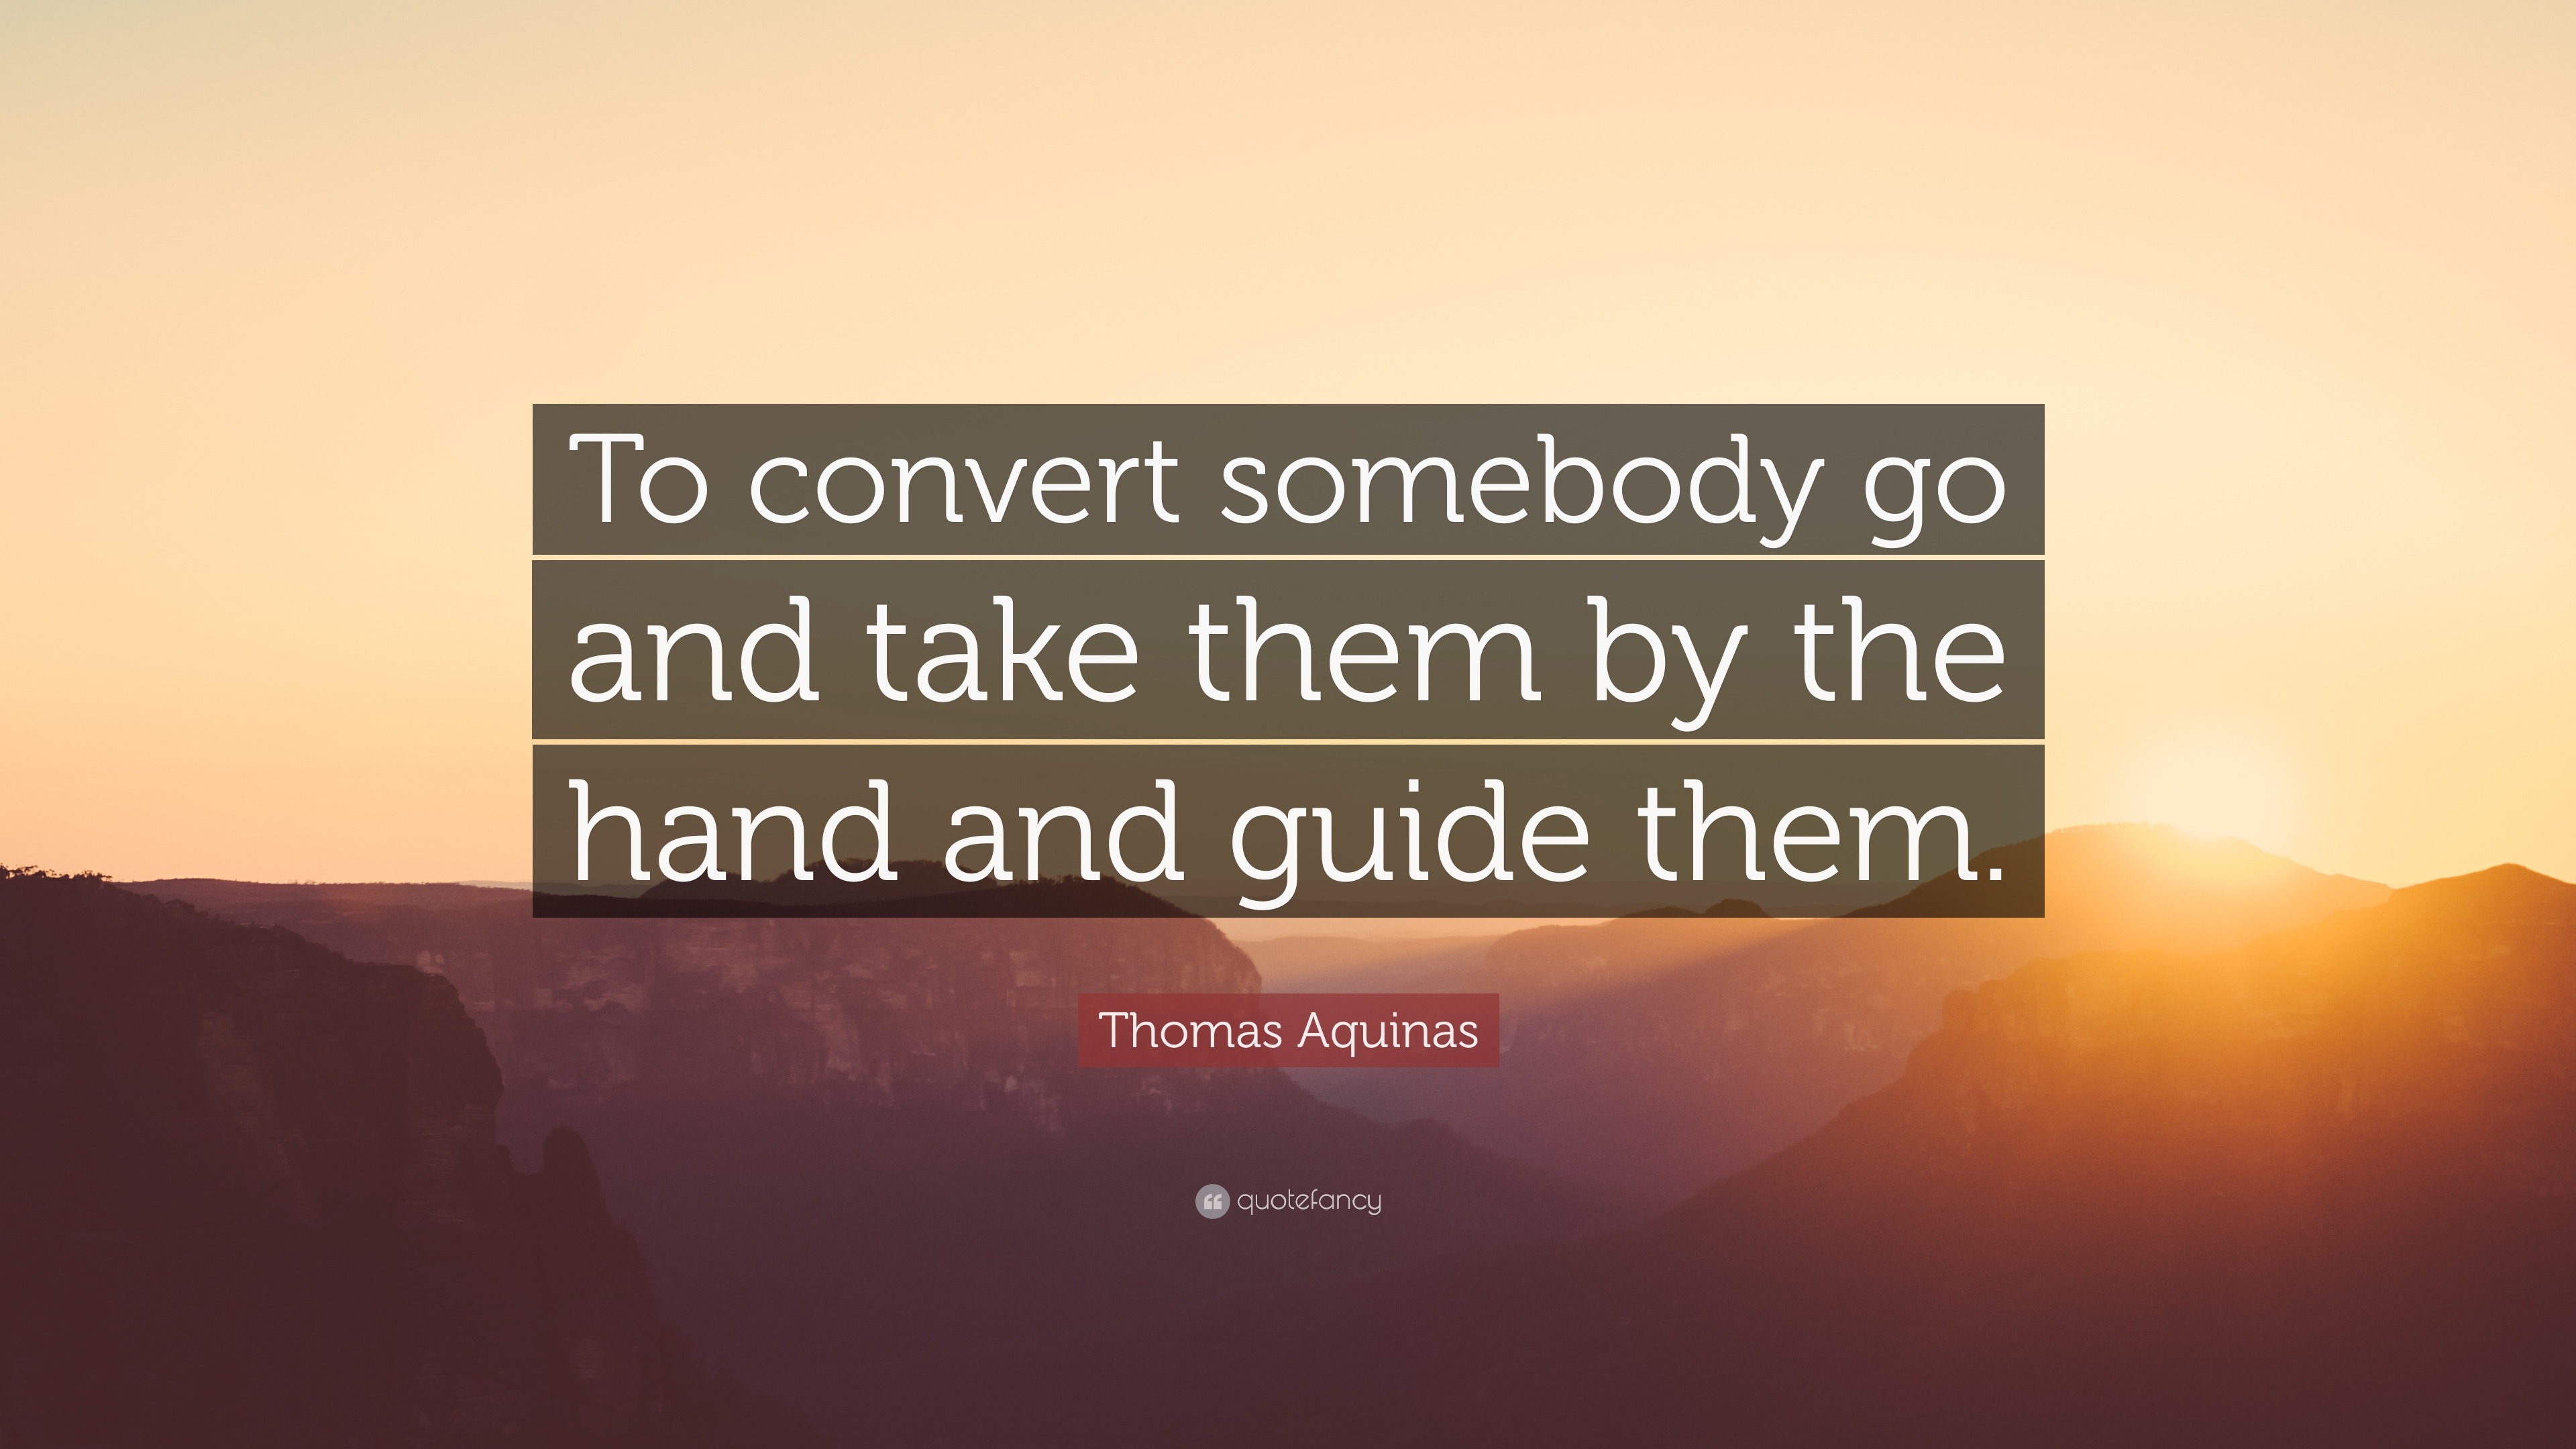 Thomas Aquinas Quote: “To convert somebody go and take them by the hand ...